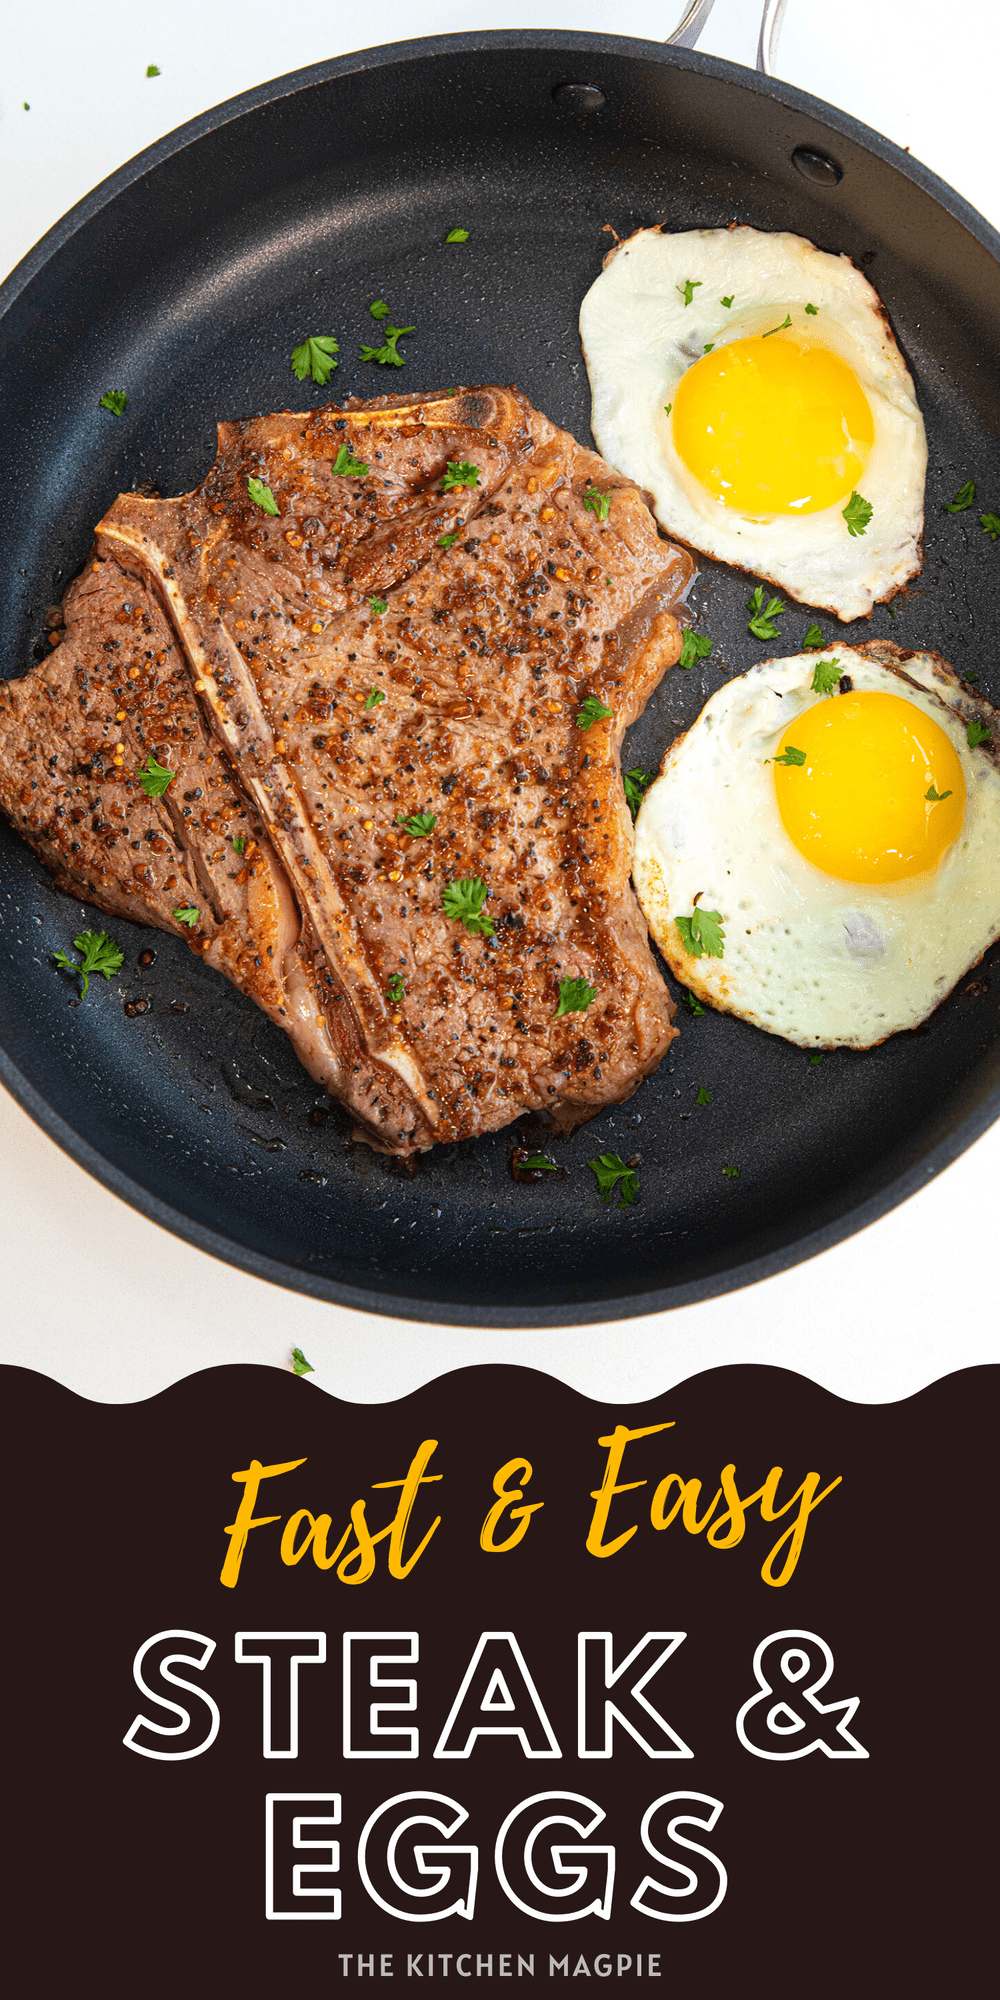 Skip the restaurant and make your own steak and eggs at home! Pan-seared or grilled steak is seasoned with steak seasoning and served with hot, fresh fried eggs for the perfect meal.